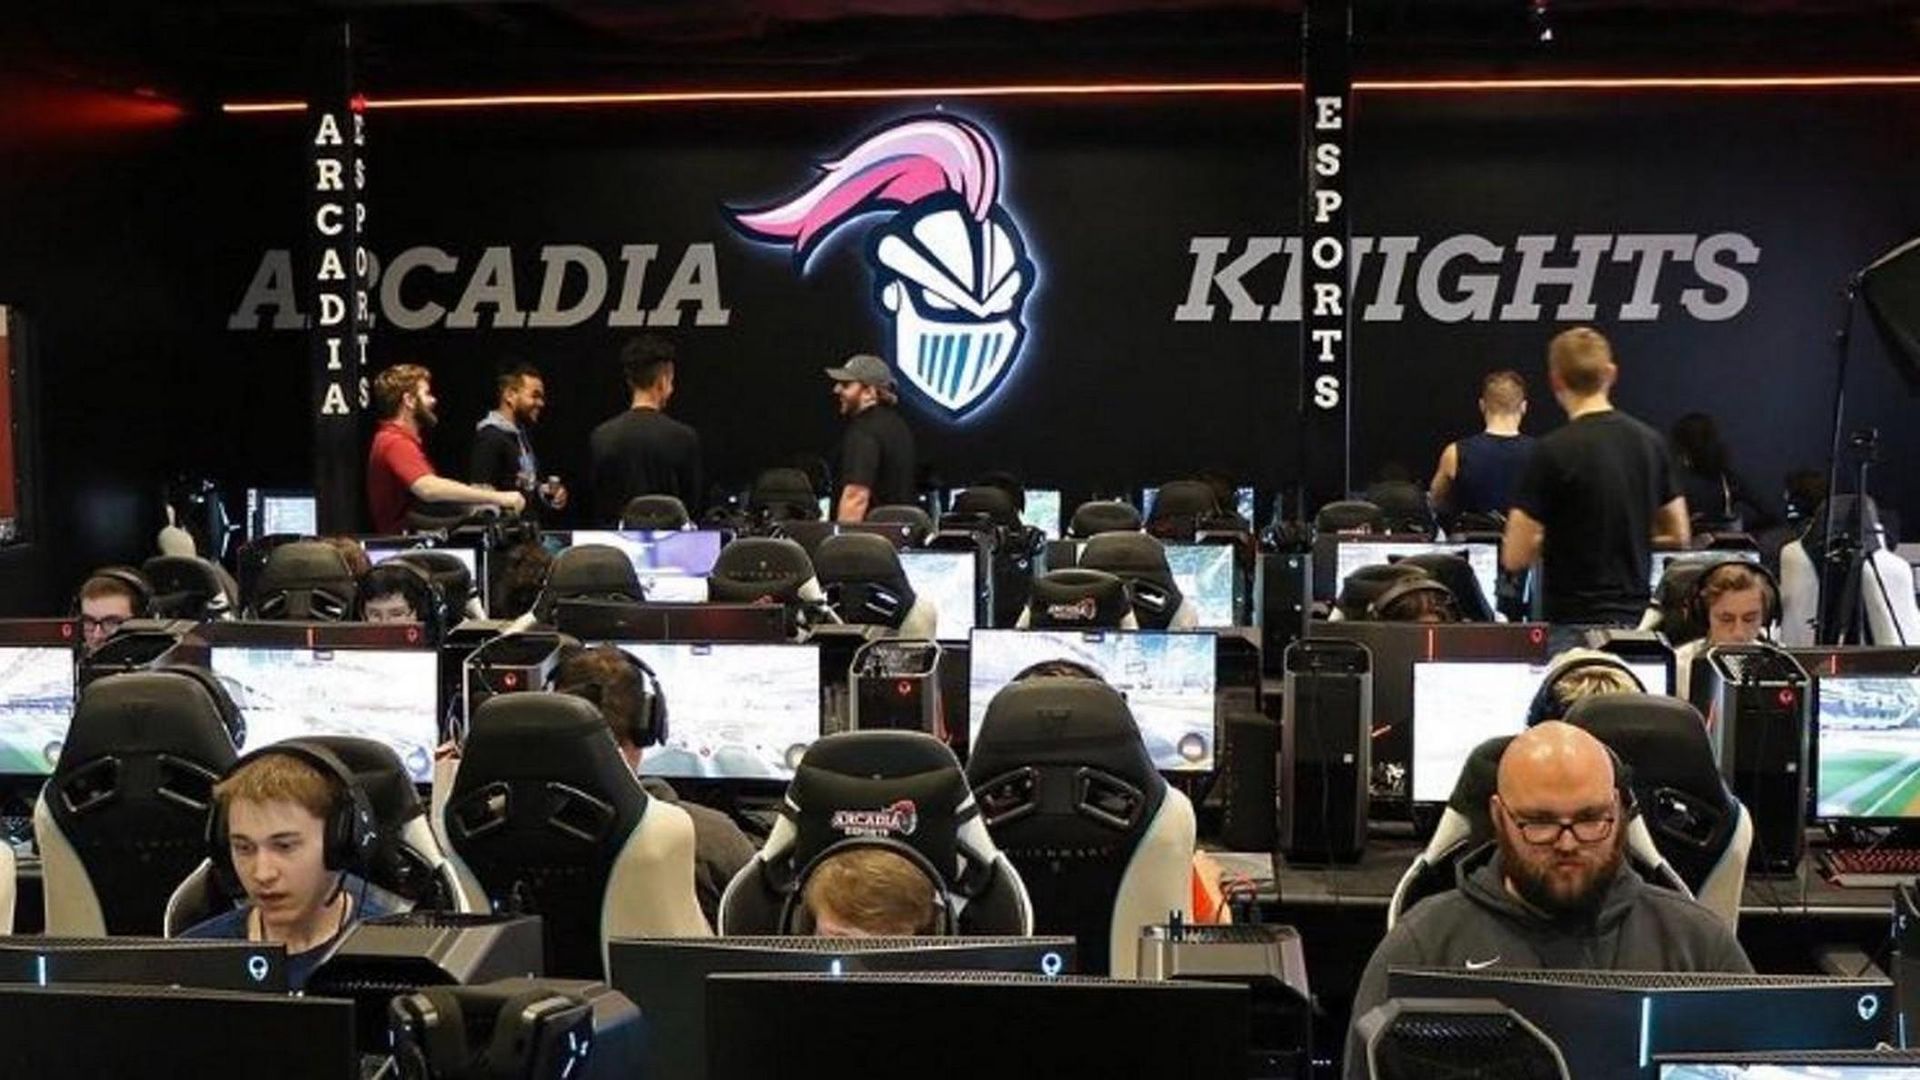 Tech needed to bet on esports